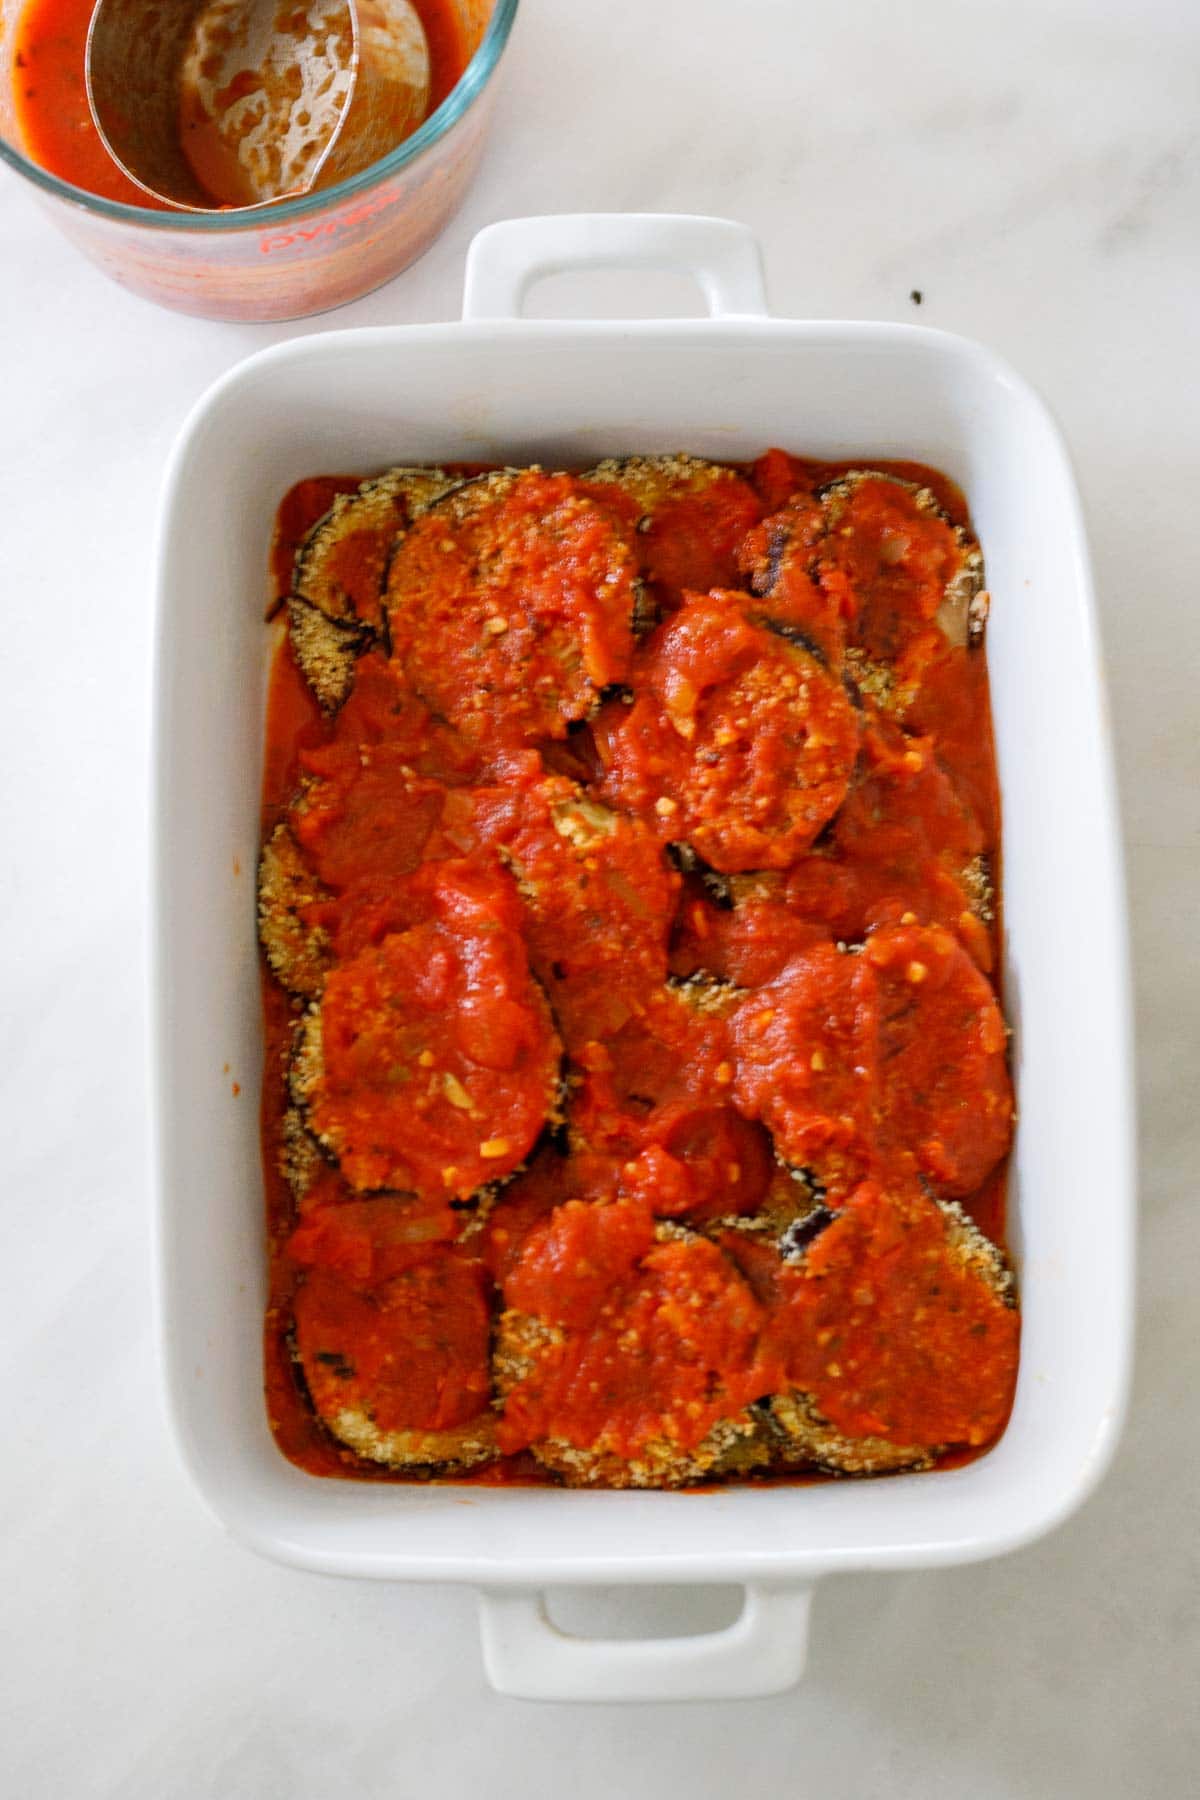 assembling eggplant parmesan with layer of marinara sauce over baked eggplant in white casserole dish